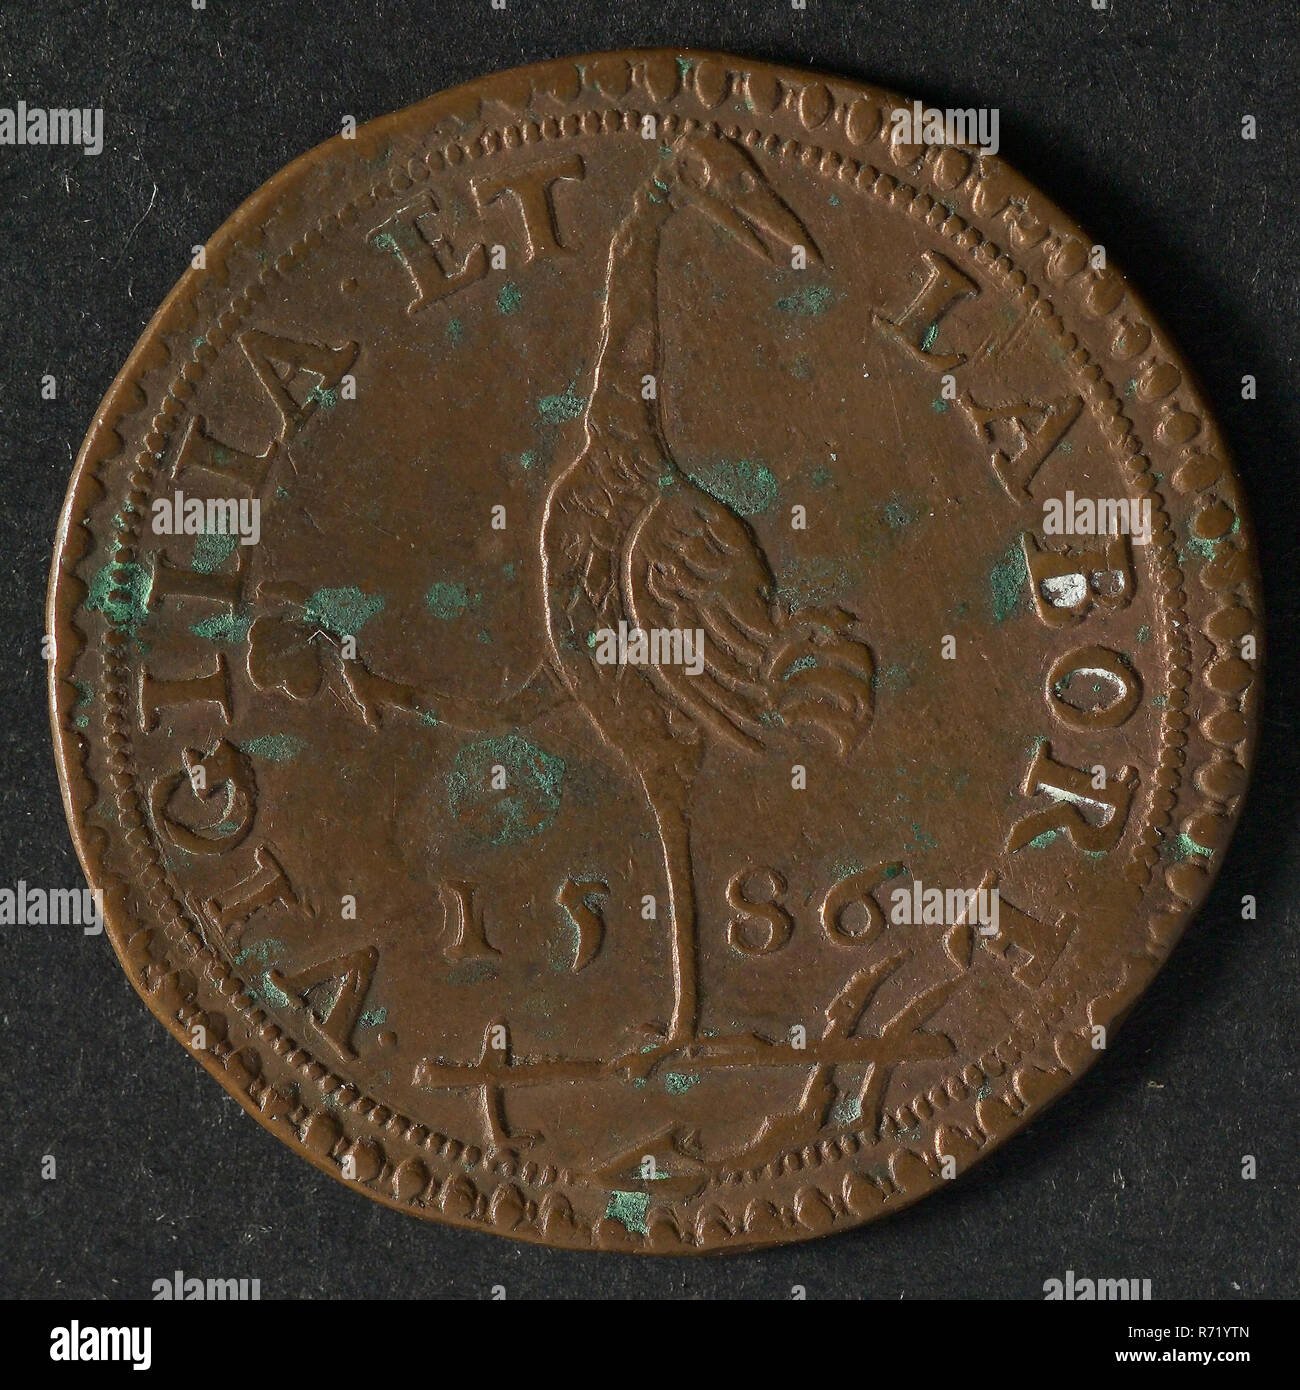 Medal in honor of Parma, jeton utility medal medal exchange copper, Obverse: crane standing on one leg on plow in the other leg stone Omschrift, omschrift .VIGILIA. ET-LABORE 15-86 (by waking and labor) Philips II Golden Fleece Stock Photo